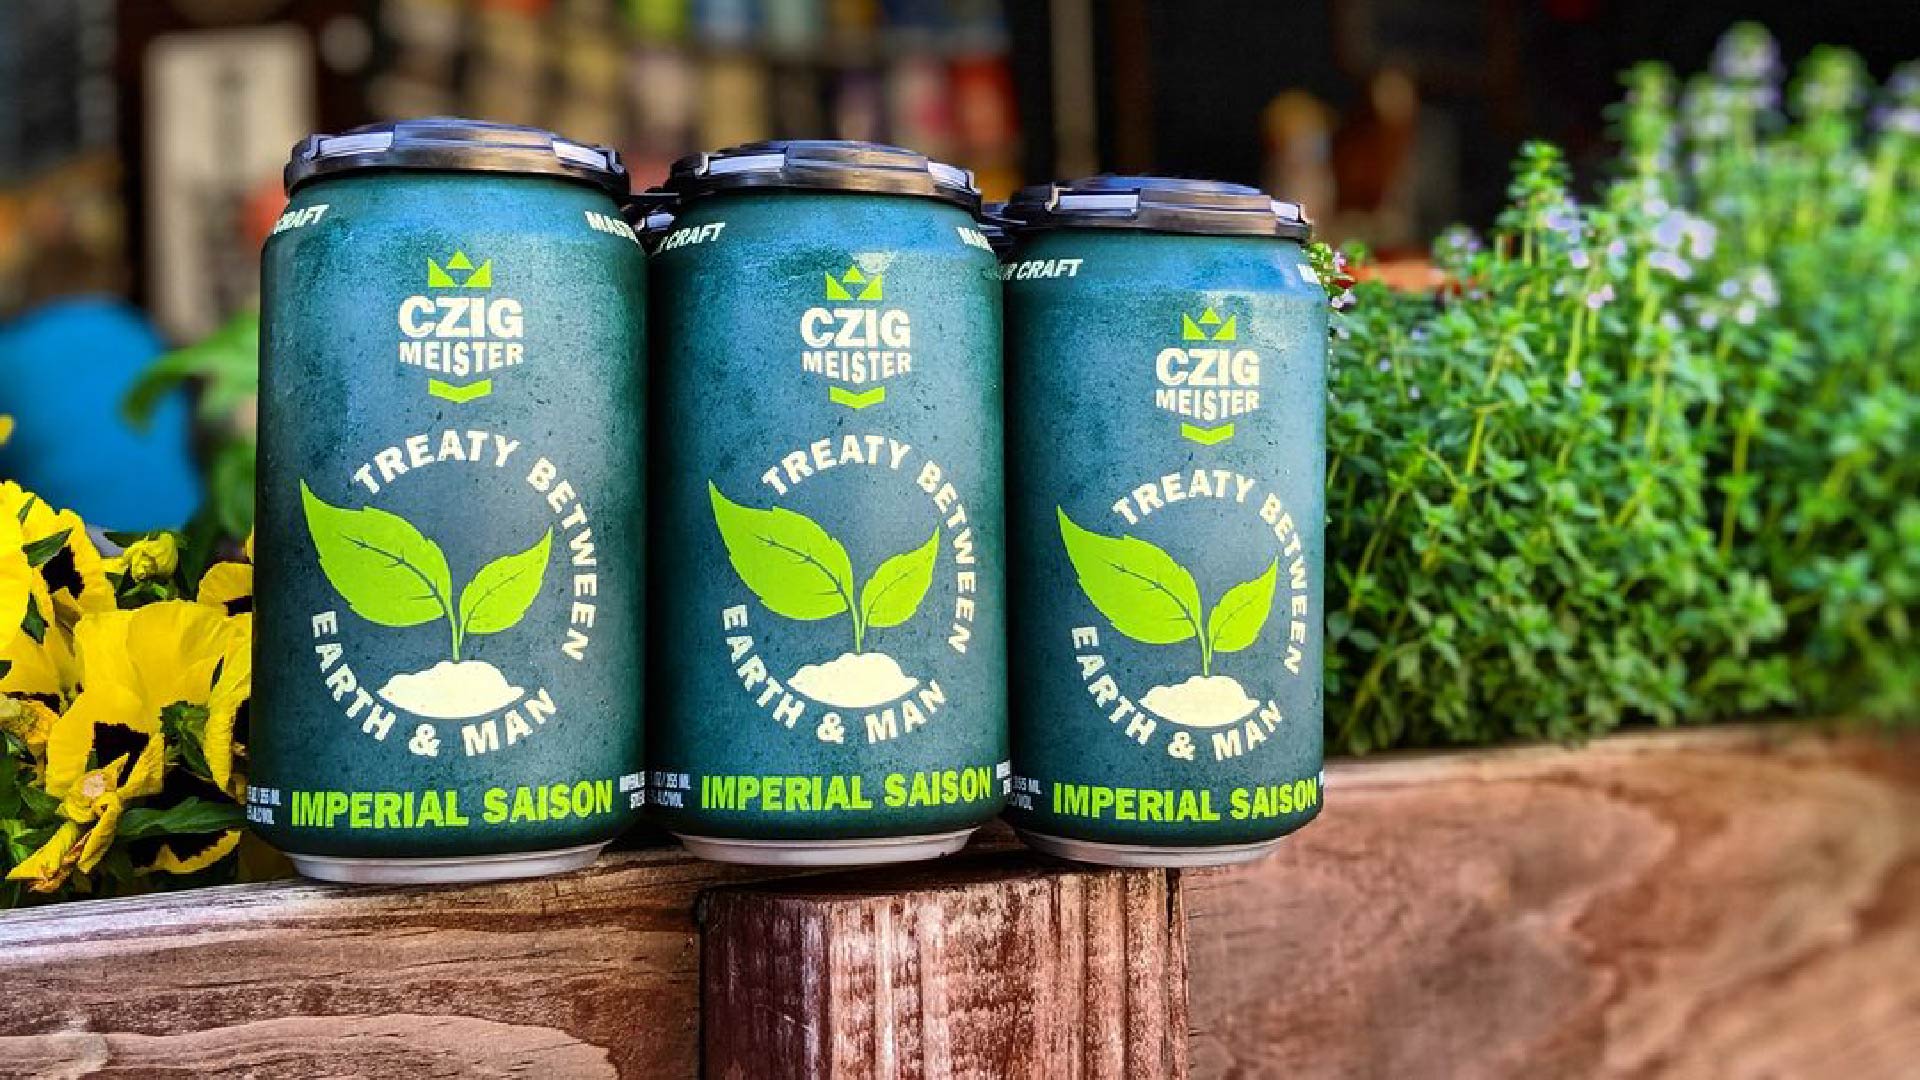 Six pack of cans of Treaty Between Earth & Man Imperial Saision at Czig Meister Brewing Company